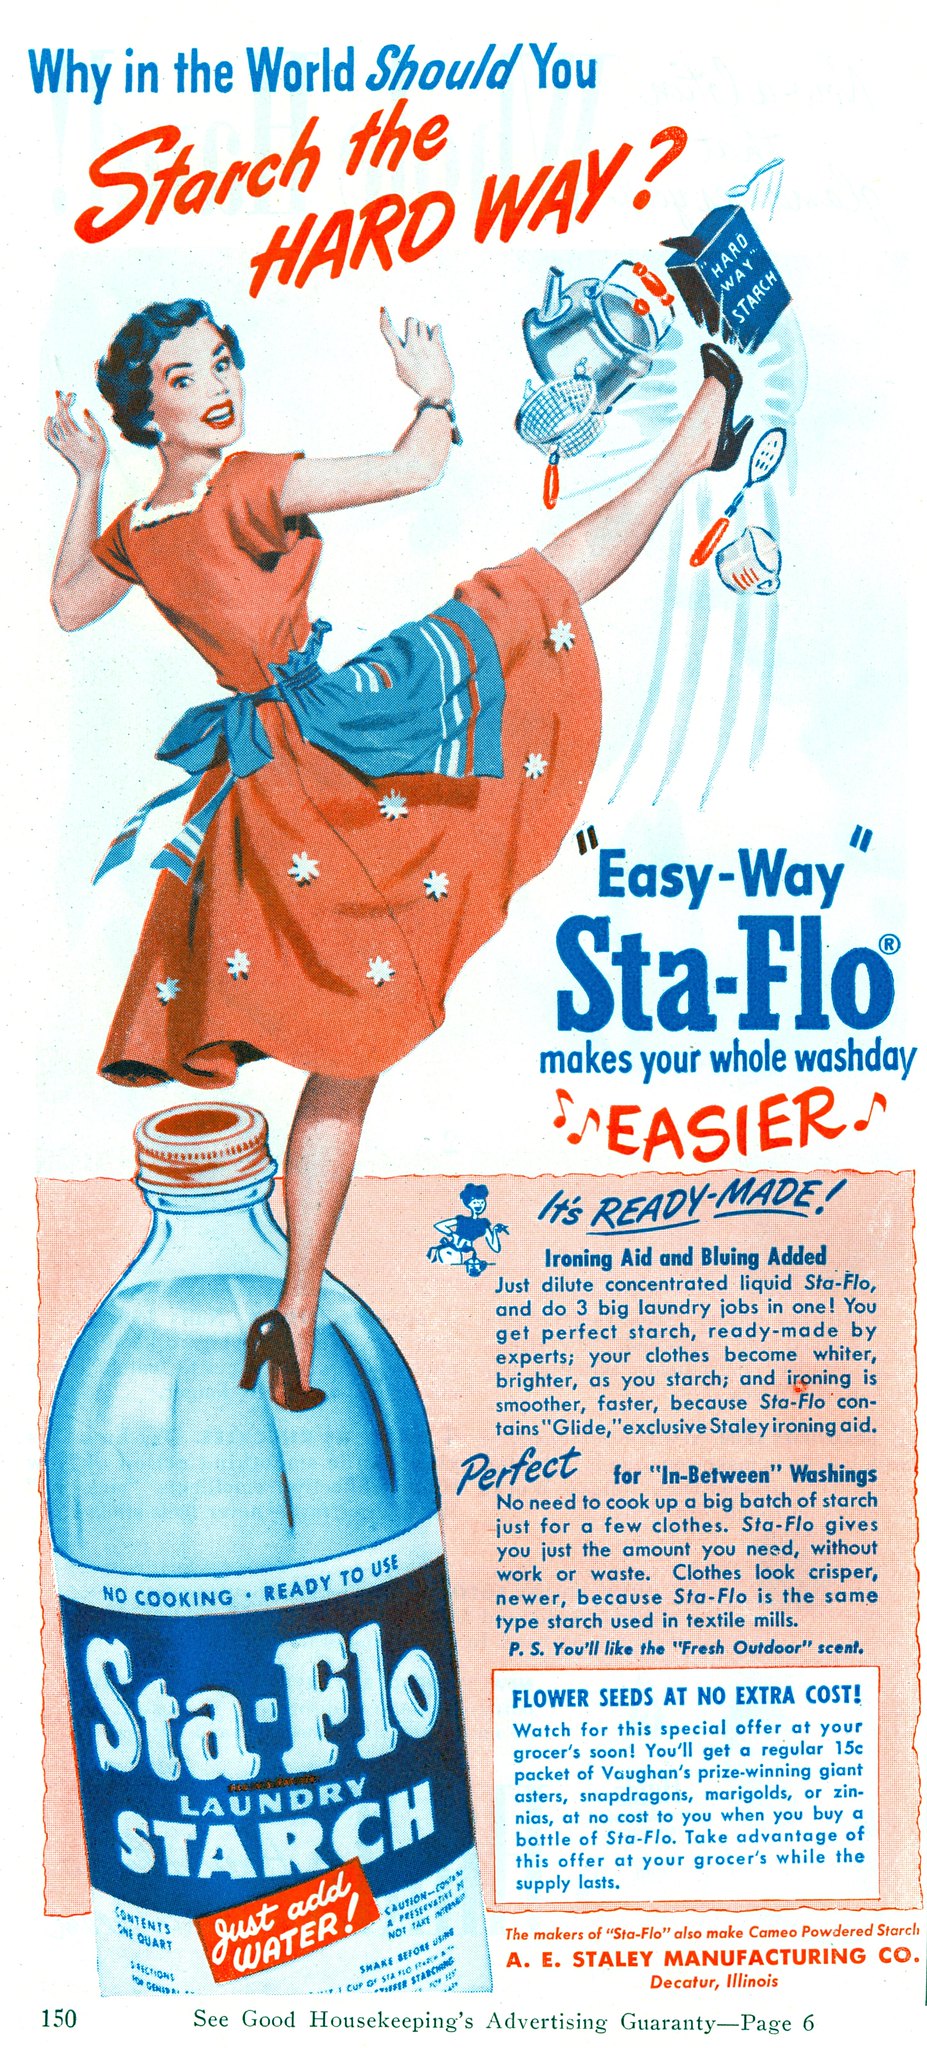 Sta-Flo Laundry Starch - published in Good Housekeeping - March 1951